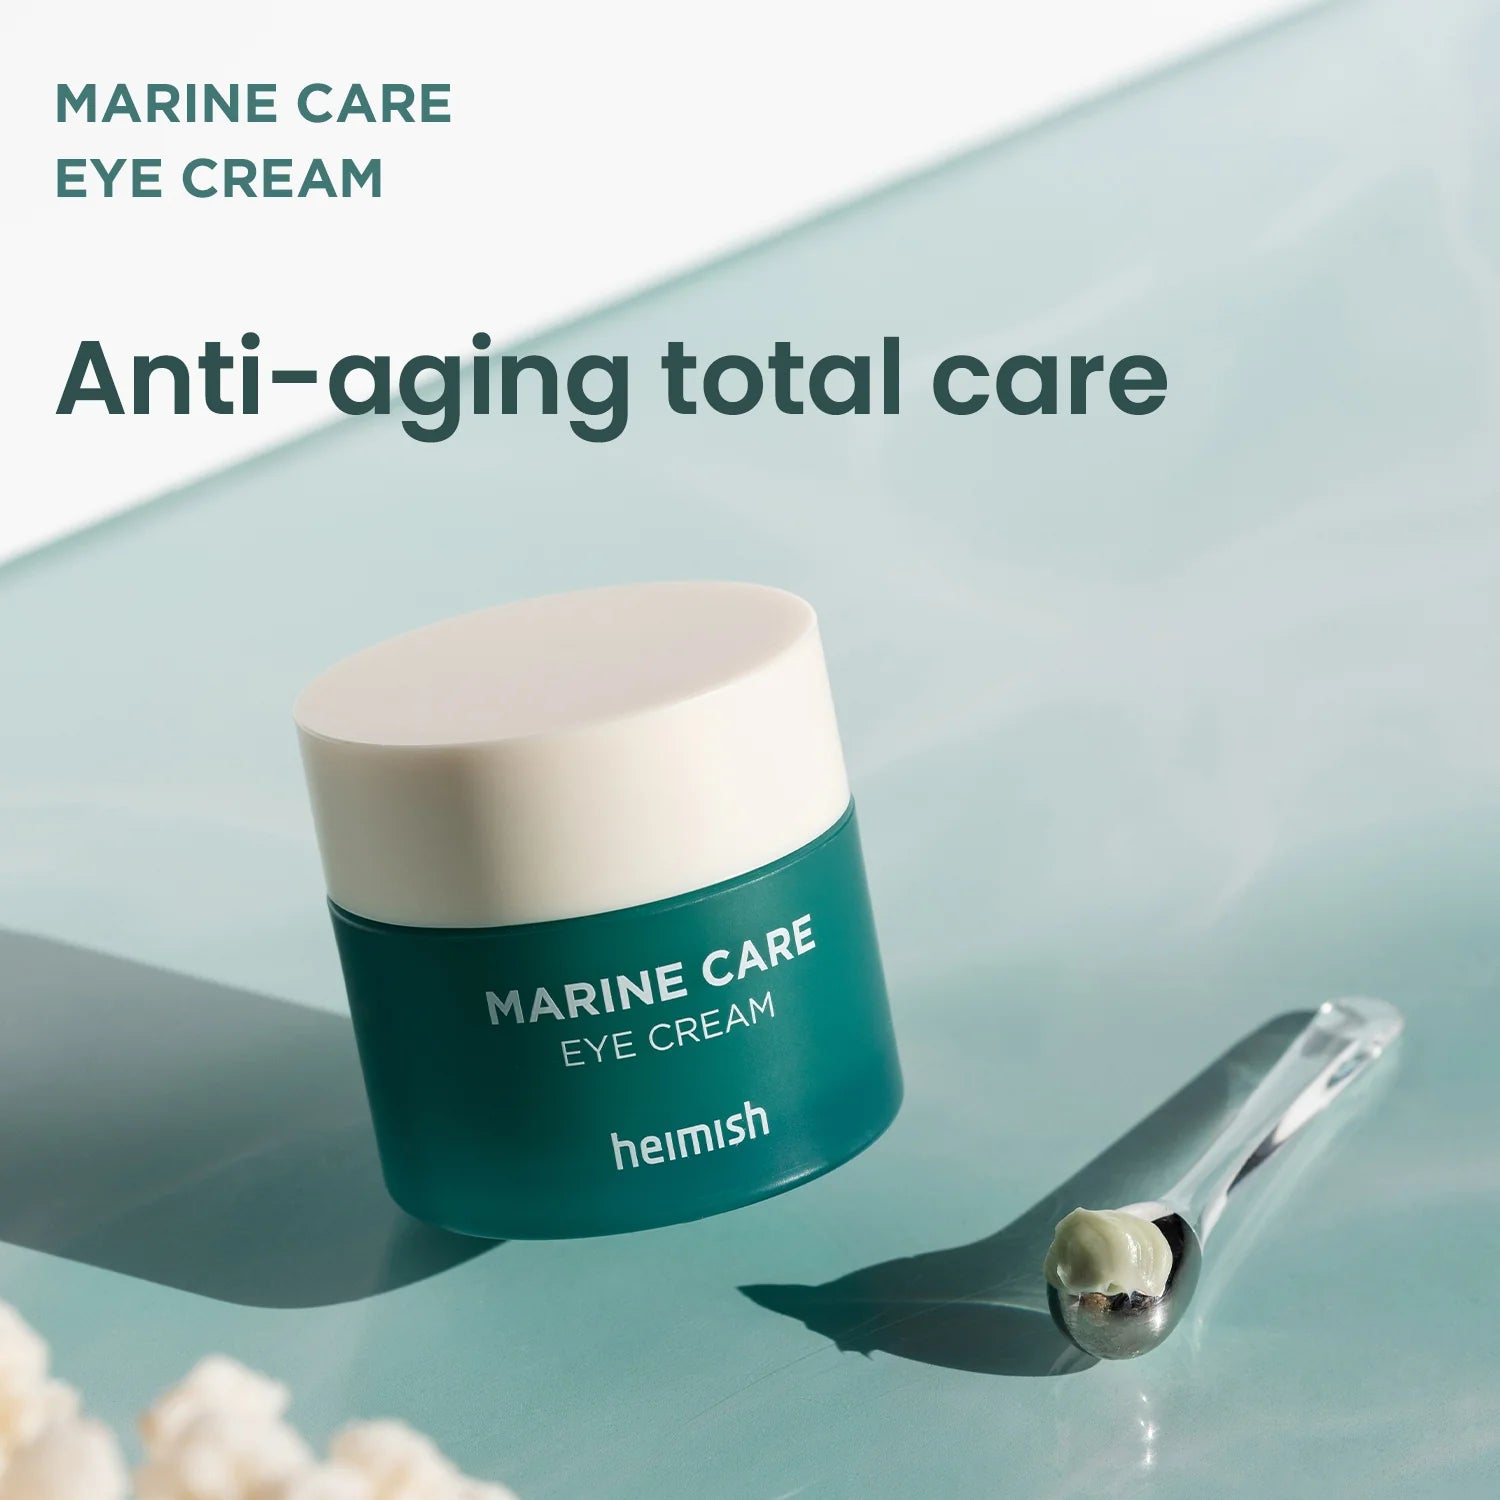 "Benefits of using Marine Care Eye Cream daily to combat signs of aging, including crow's feet and under-eye bags